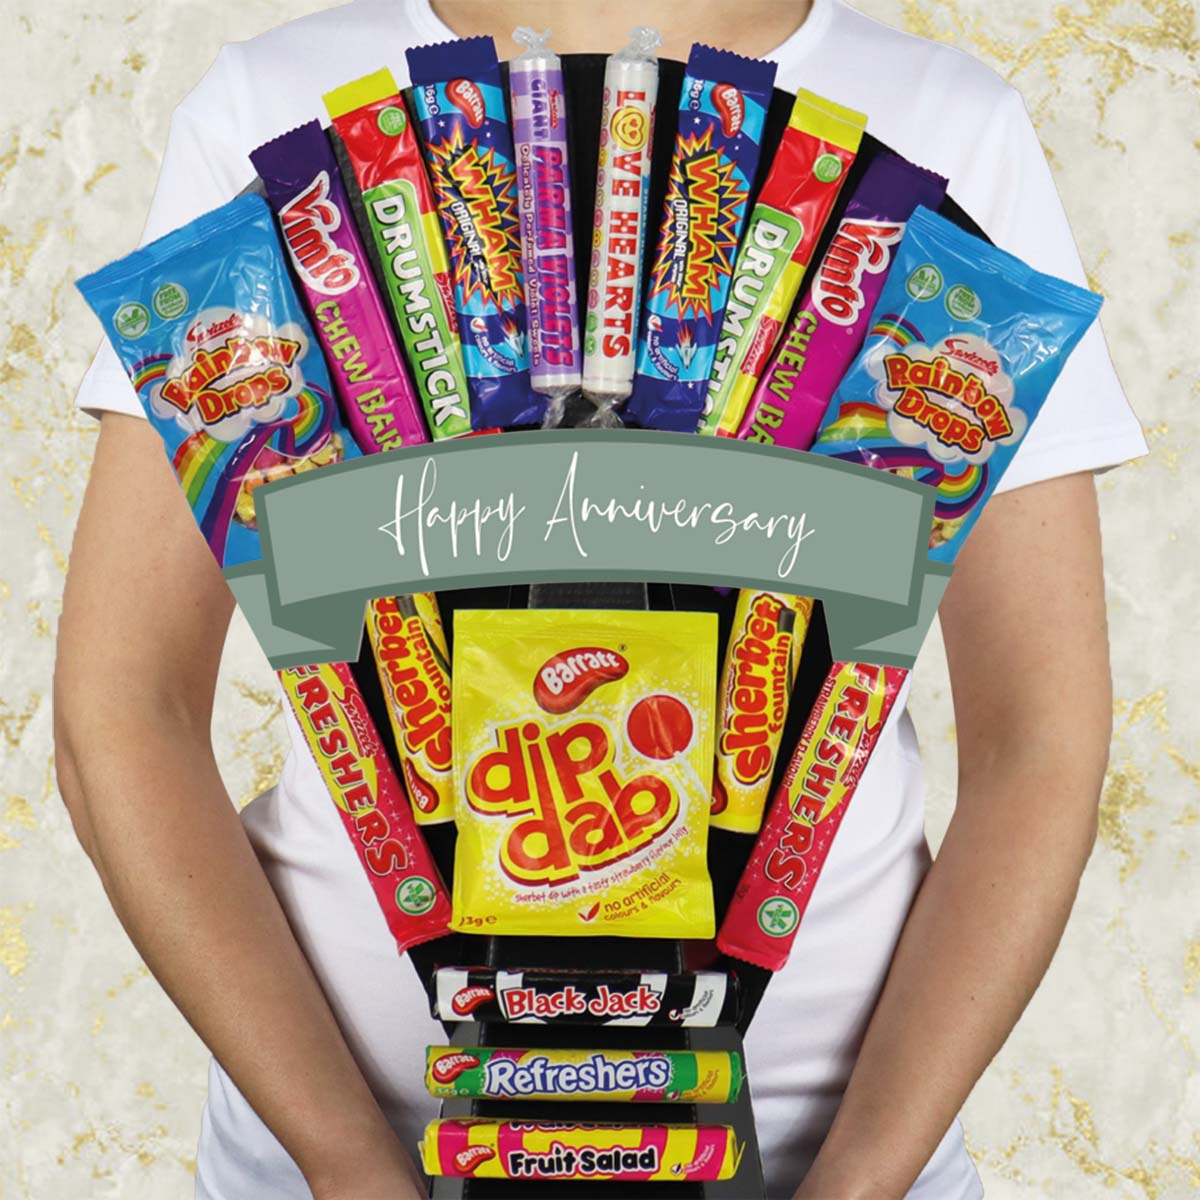 The XL Retro Sweets Anniversary Bouquet with Dip Dabs, Black Jack, Drumsticks and More - Gift Hamper Box by HamperWell